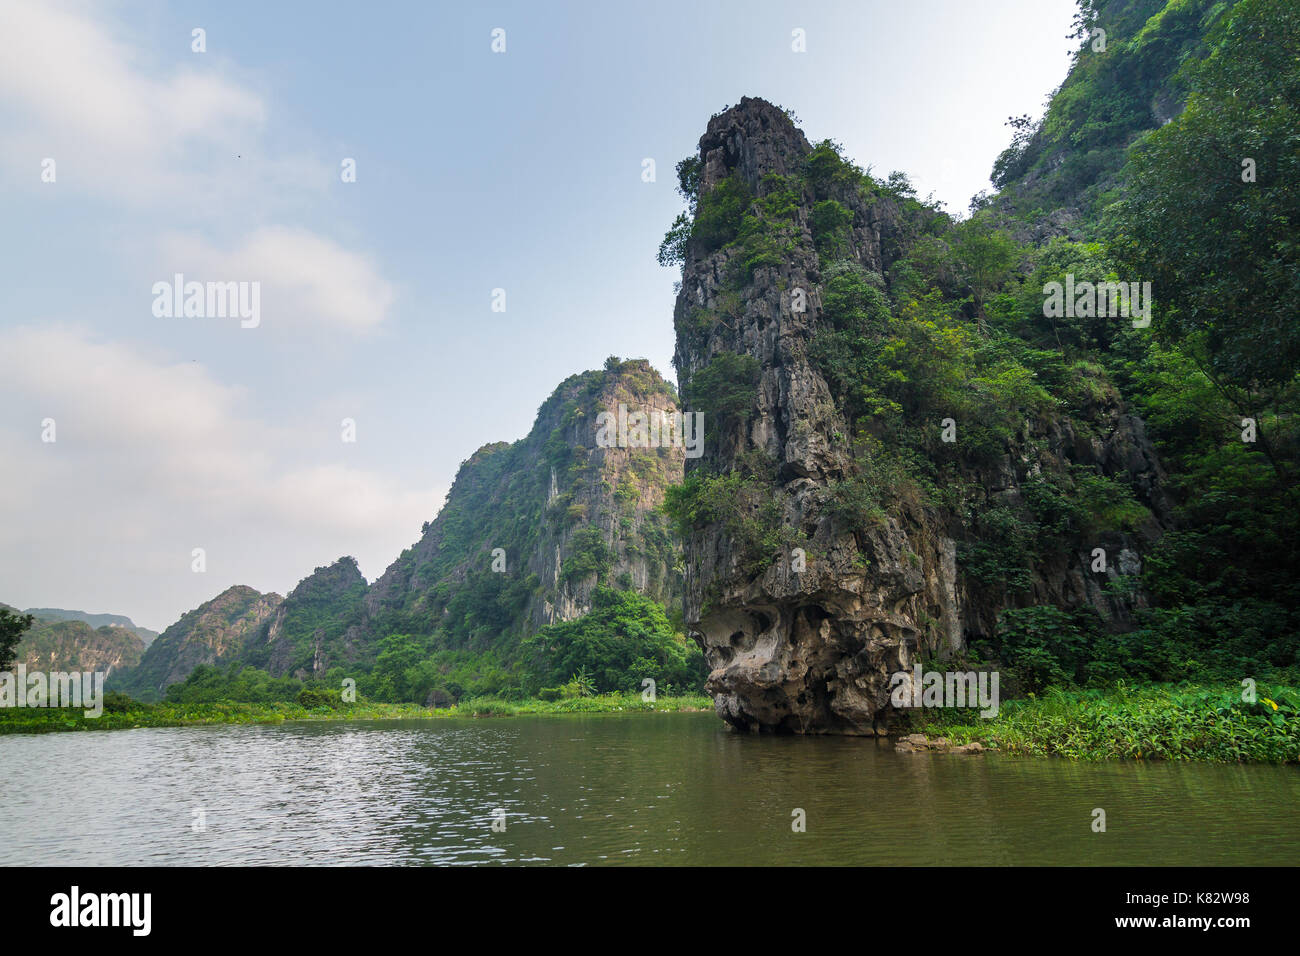 Mountains along the Ngo Dong River, near Tam Coc village, at the Trang An UNESCO World Heritage site in Ninh Binh, Vietnam. Stock Photo